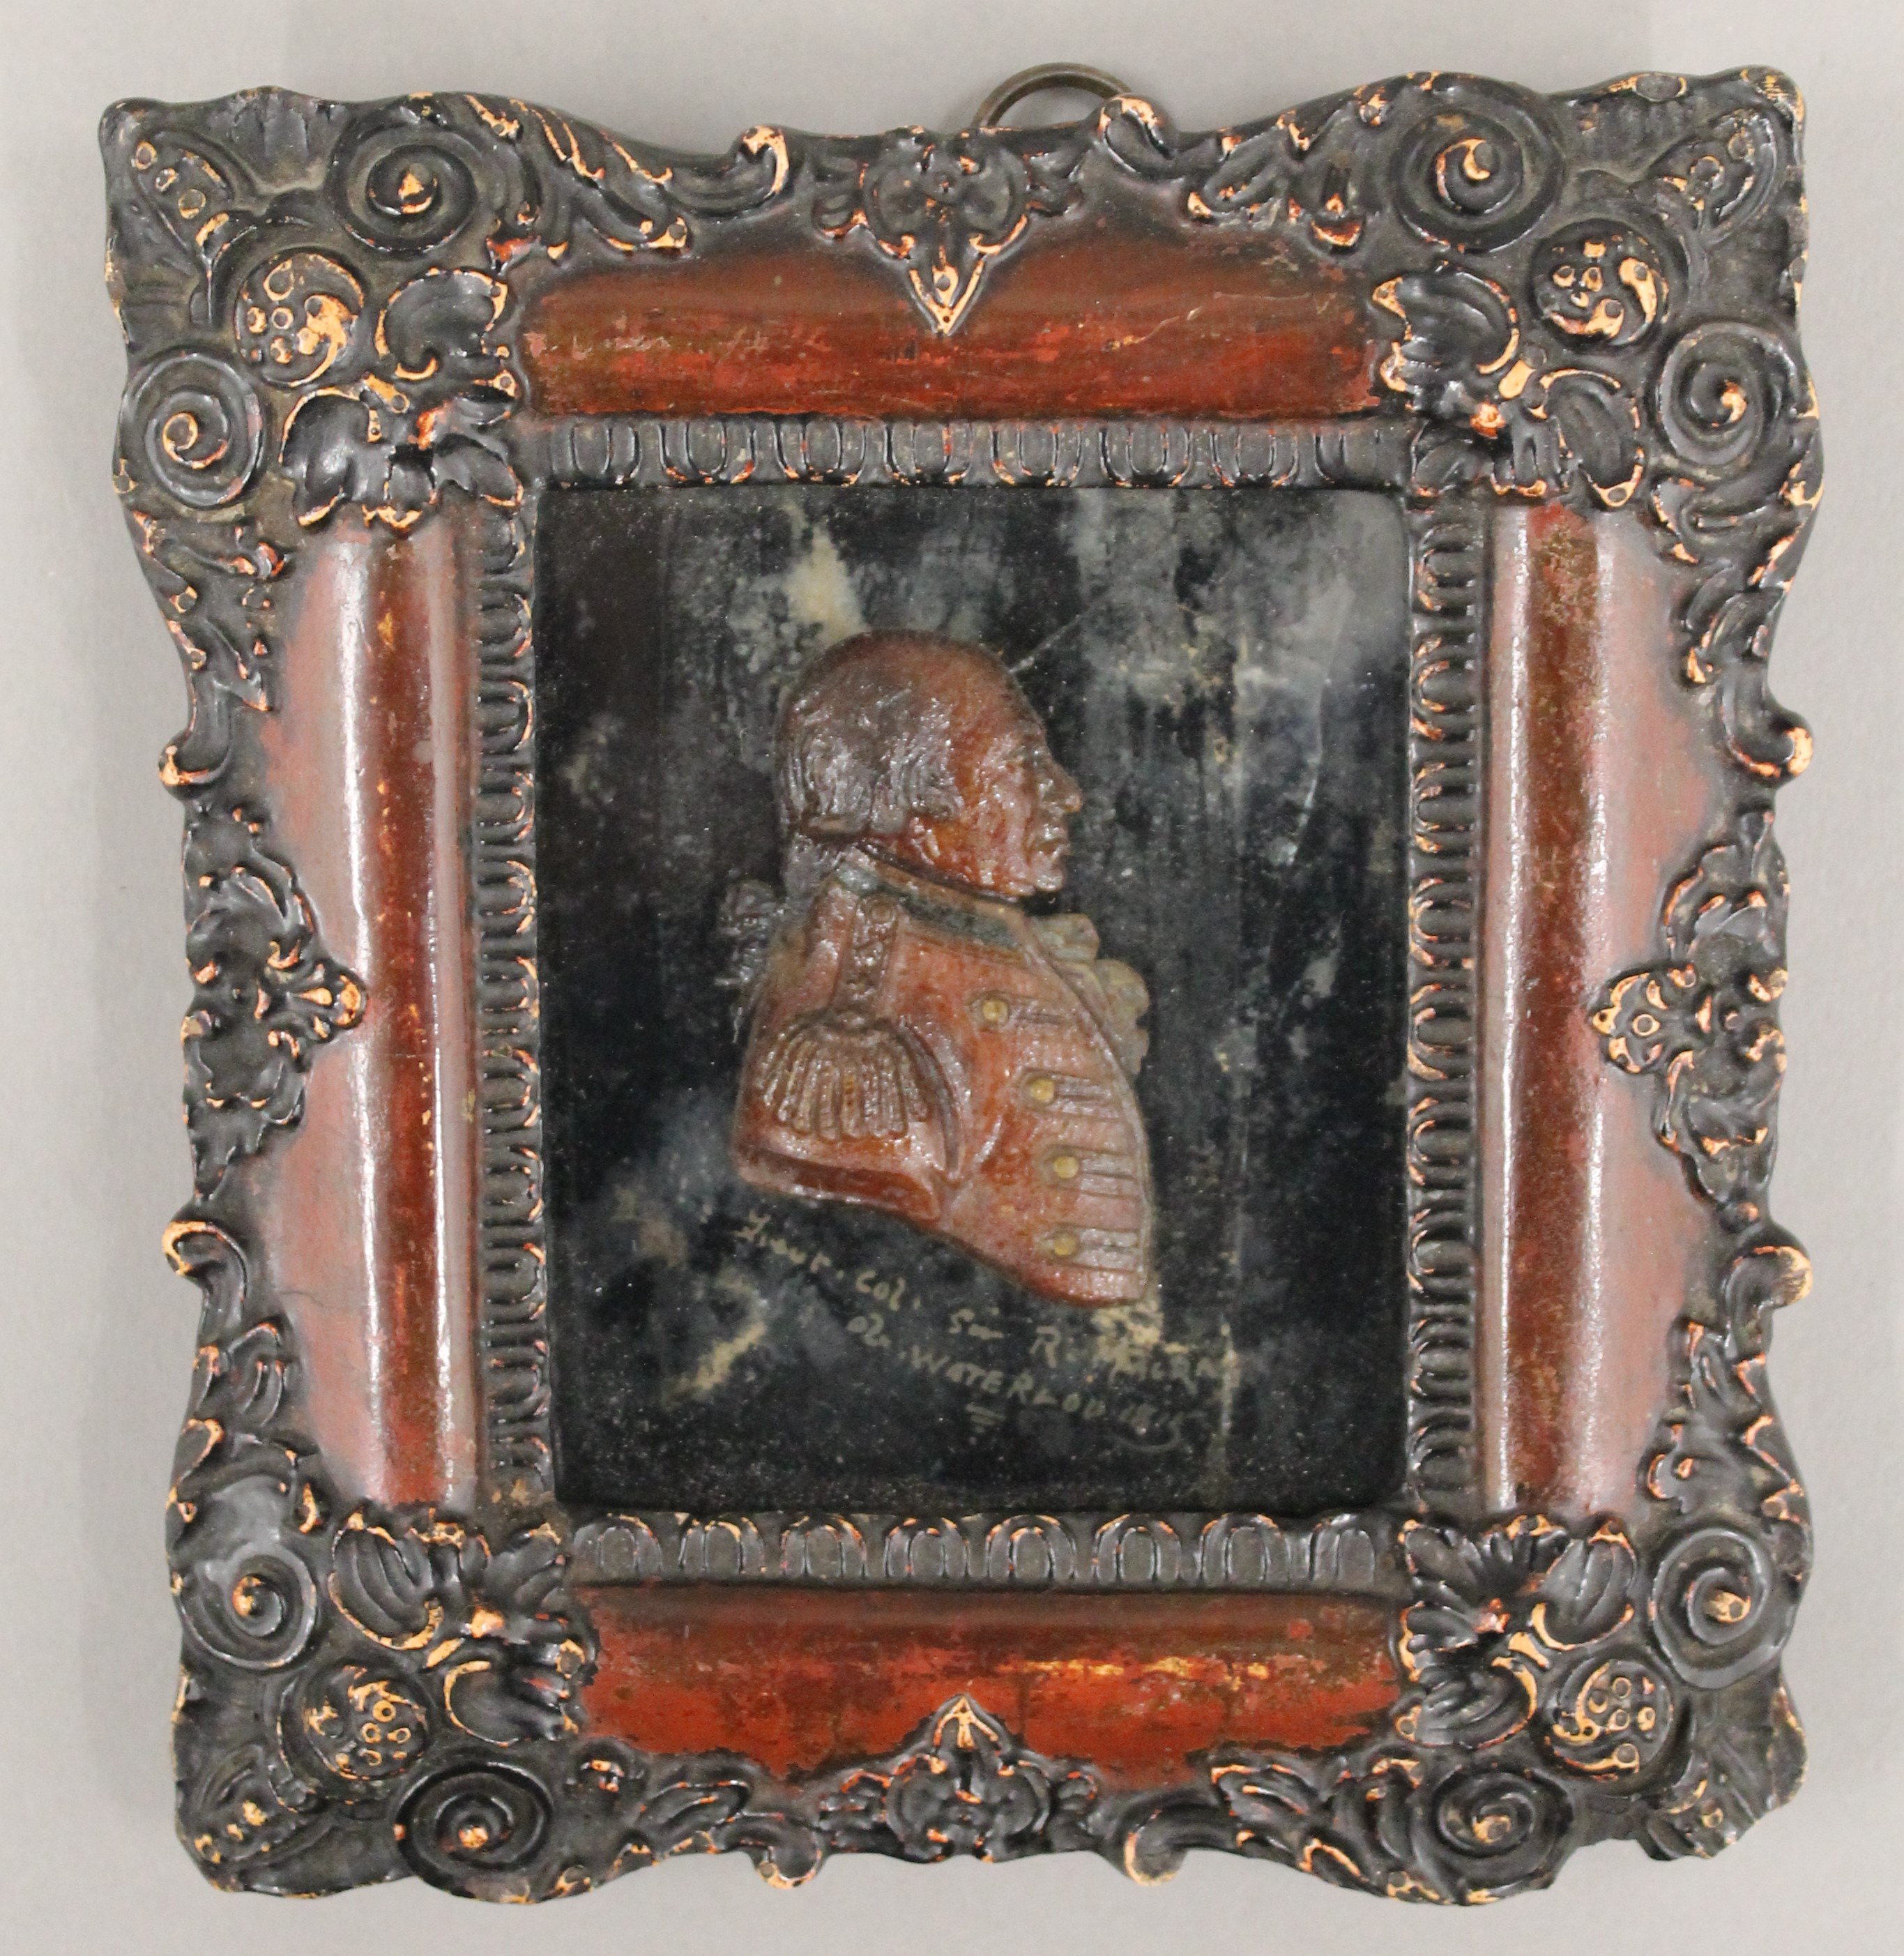 A small 19th century wax portrait of a military officer, framed and glazed. 16 x 17.5 cm.